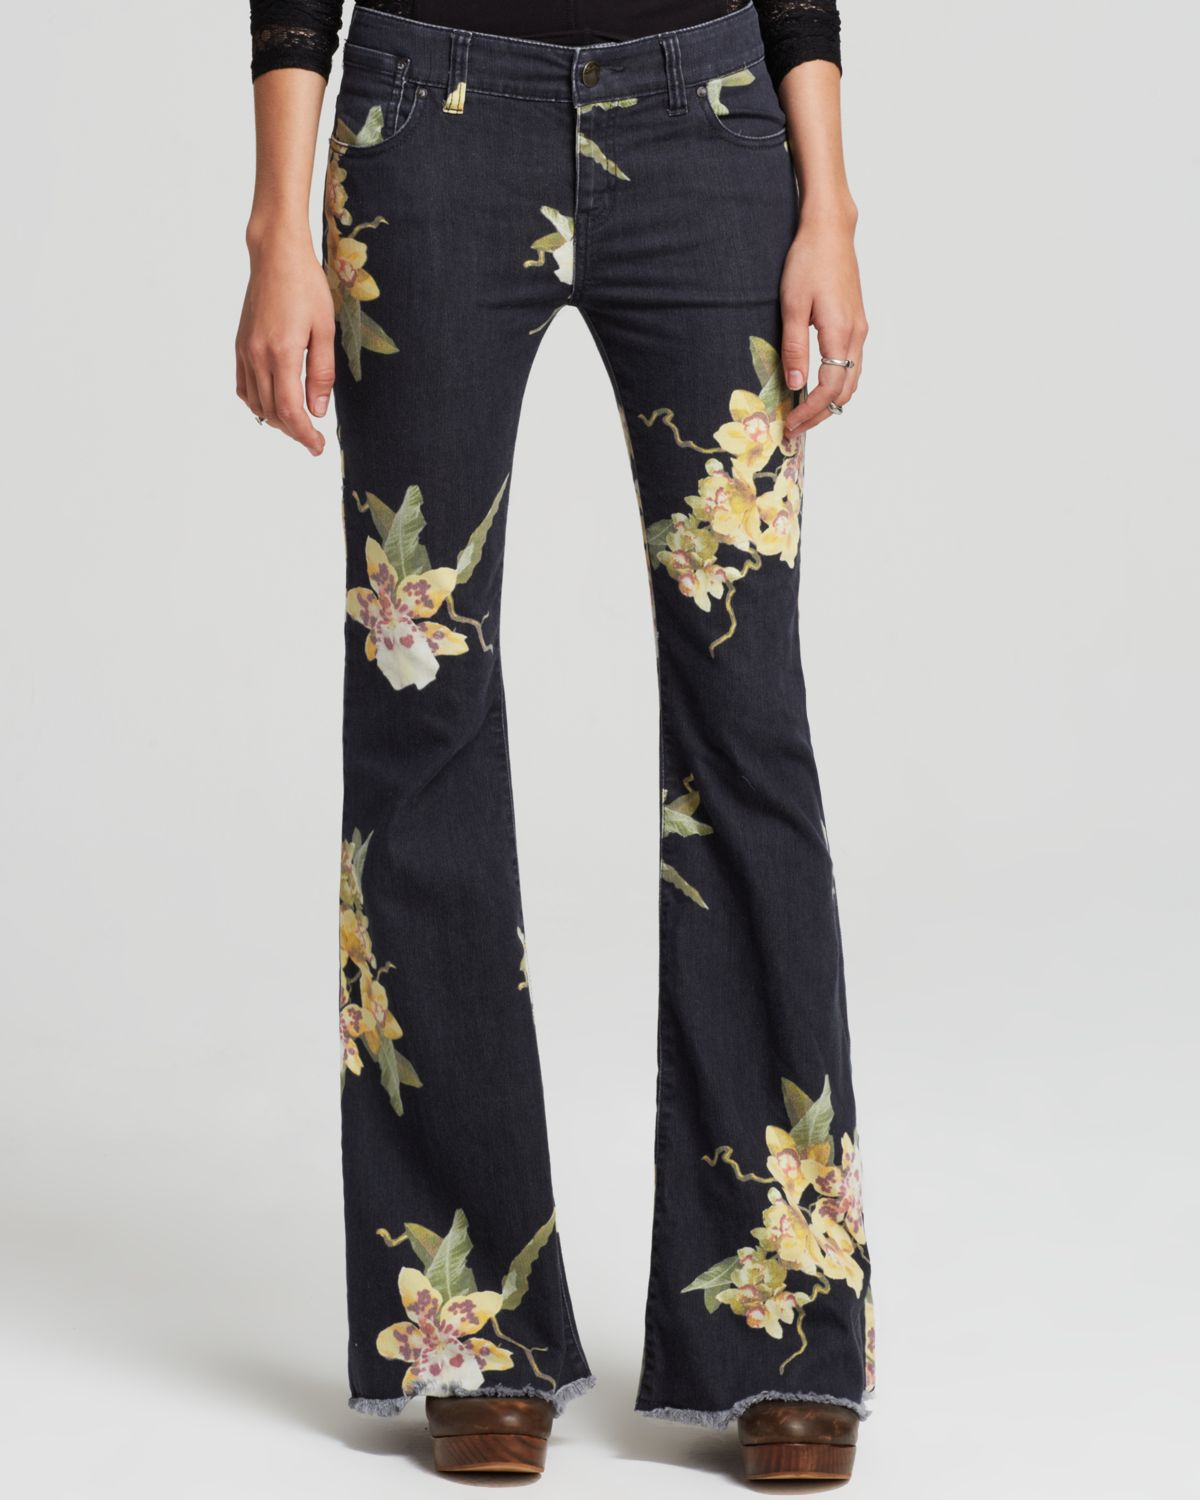 Free People Jeans - Floral Bali Flare In Miami Night Combo in Floral ...